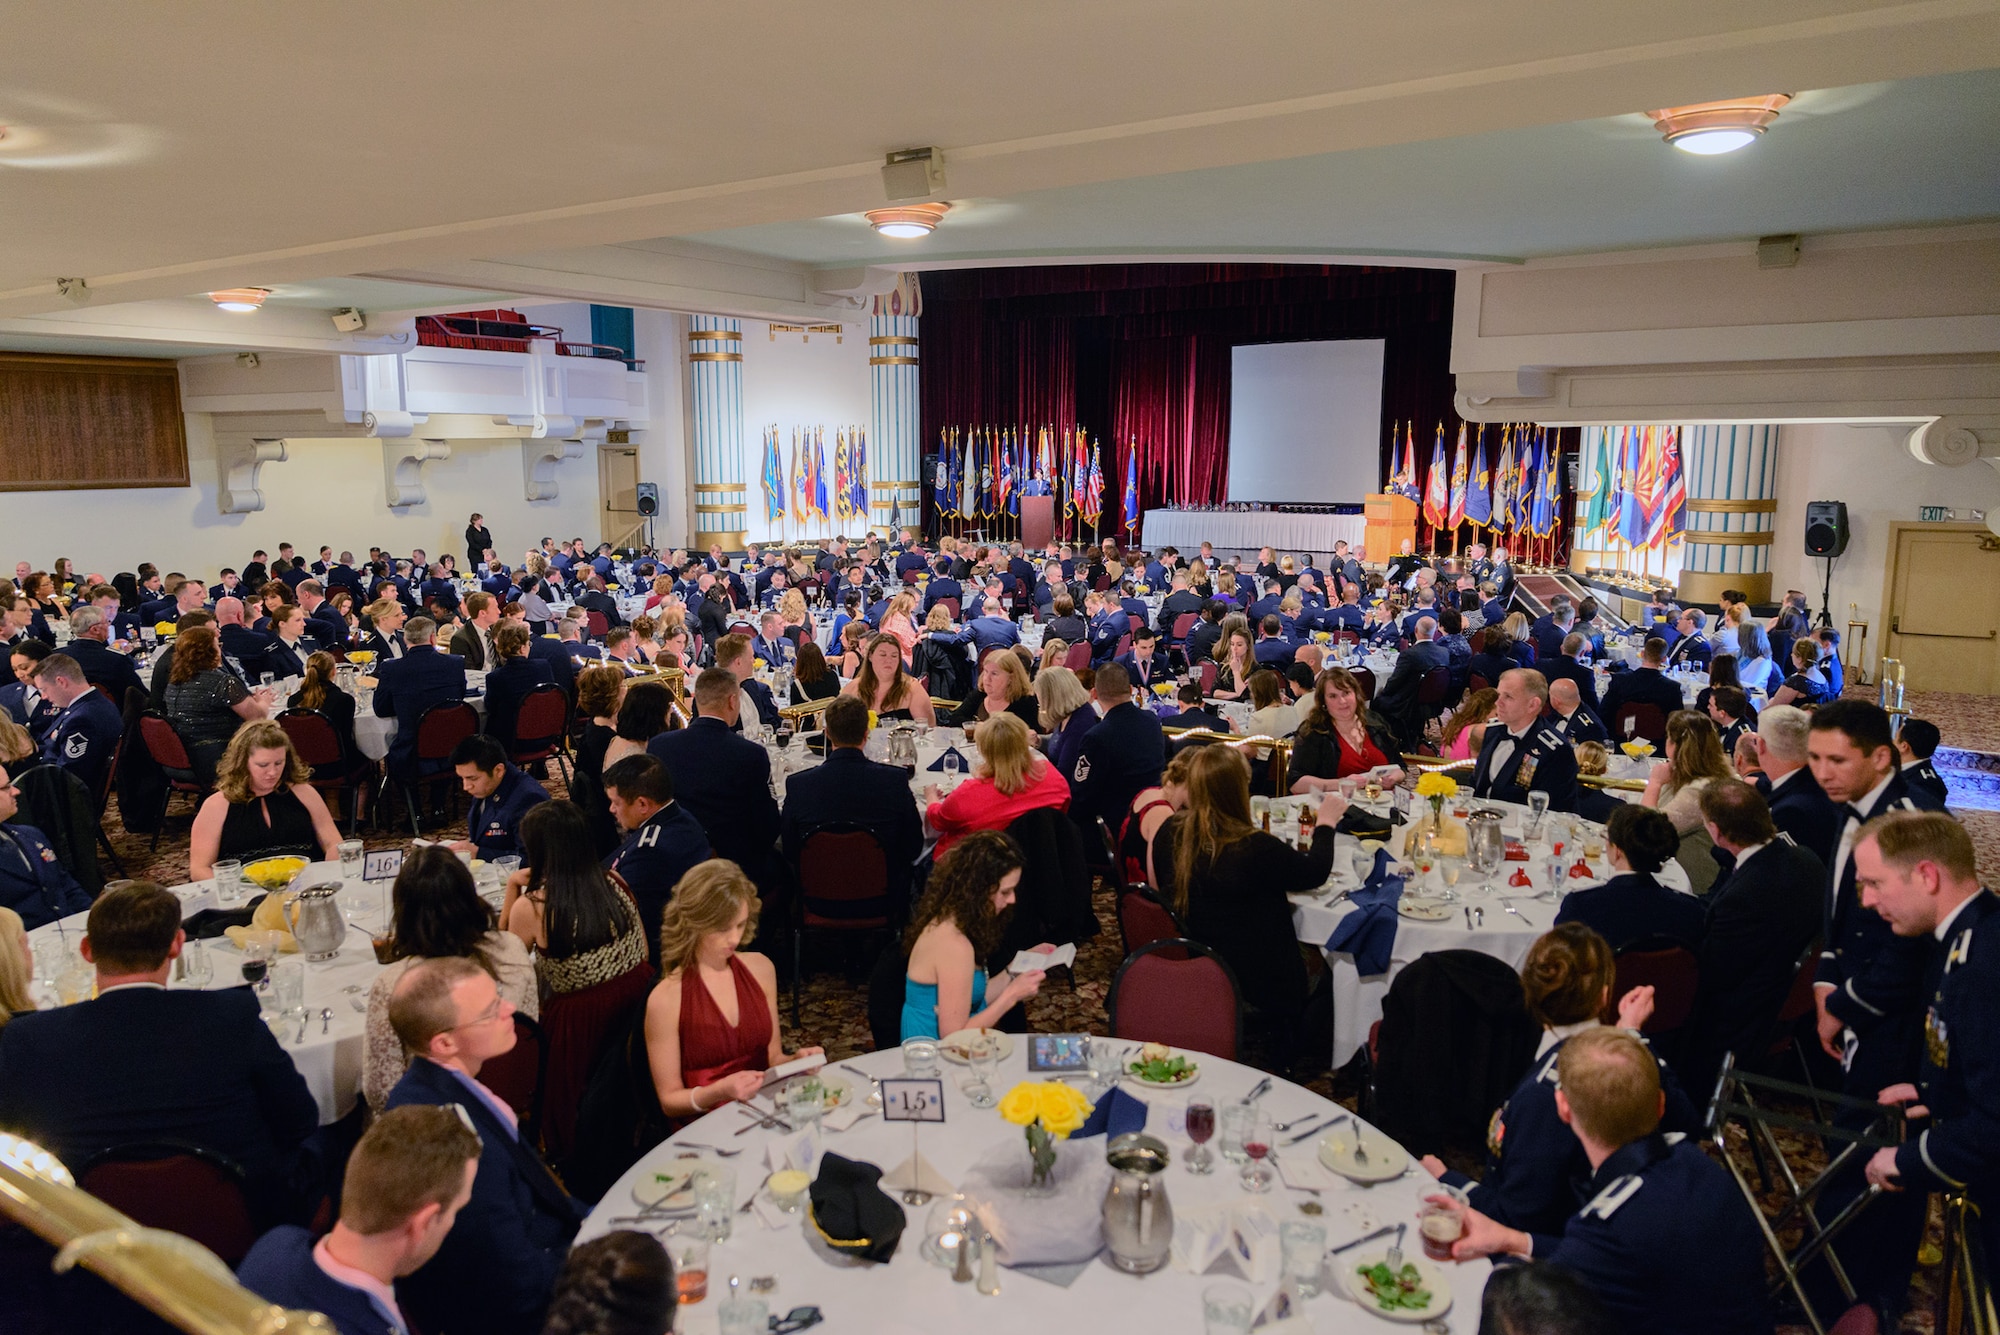 About 500 wing Reservists, civilians, and family members eat dinner at the 2015 446th Airlift Wing Awards Banquet at the Landmark Convention Center, Tacoma, April 11 in anticipation of honoring wing's quarterly and annual award recipients for 2014. (Courtesy photo by David Lobban Photography)